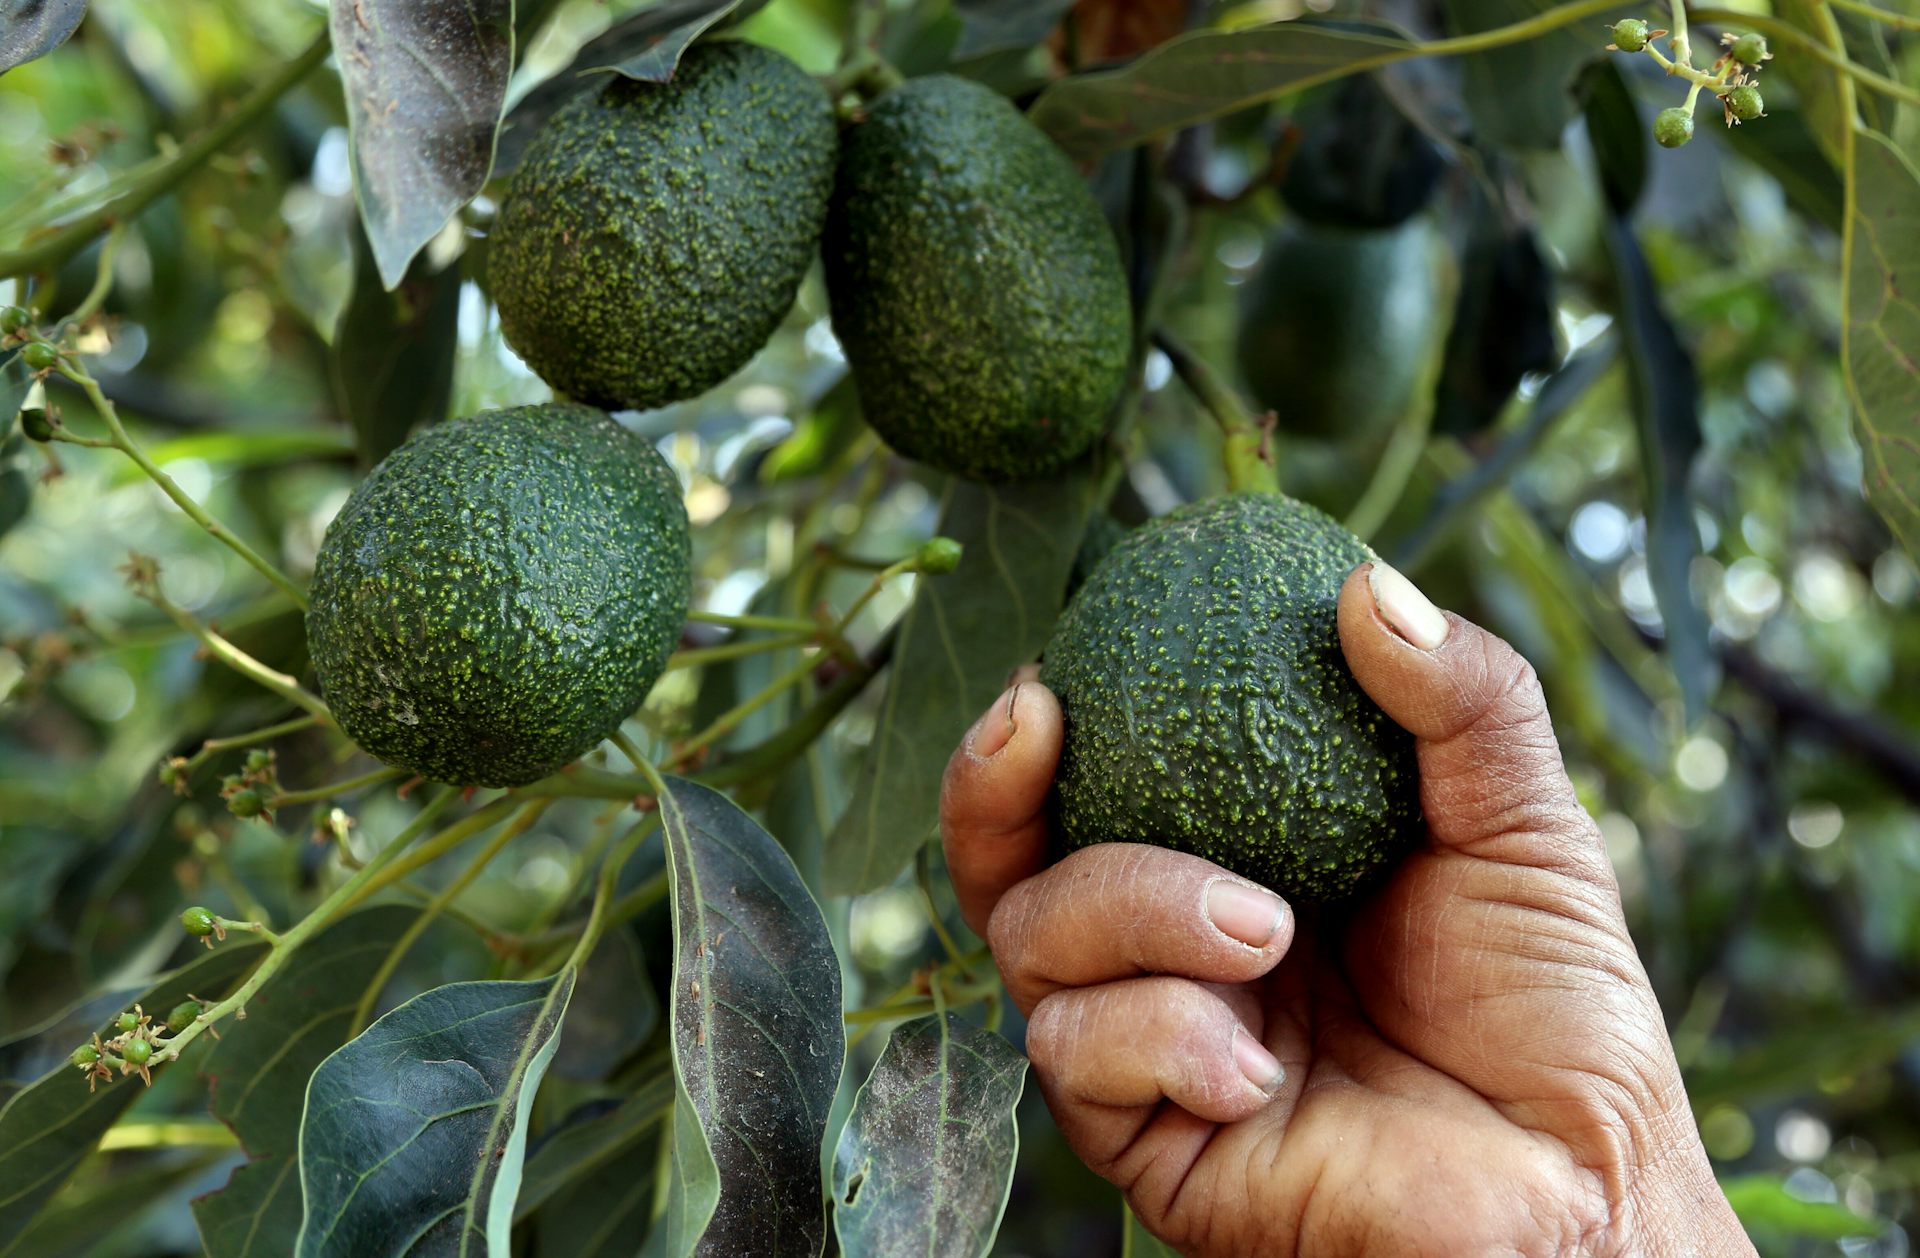 How Mexico’s Lucrative Avocado Industry Found Itself Smack in the Middle of Gangland